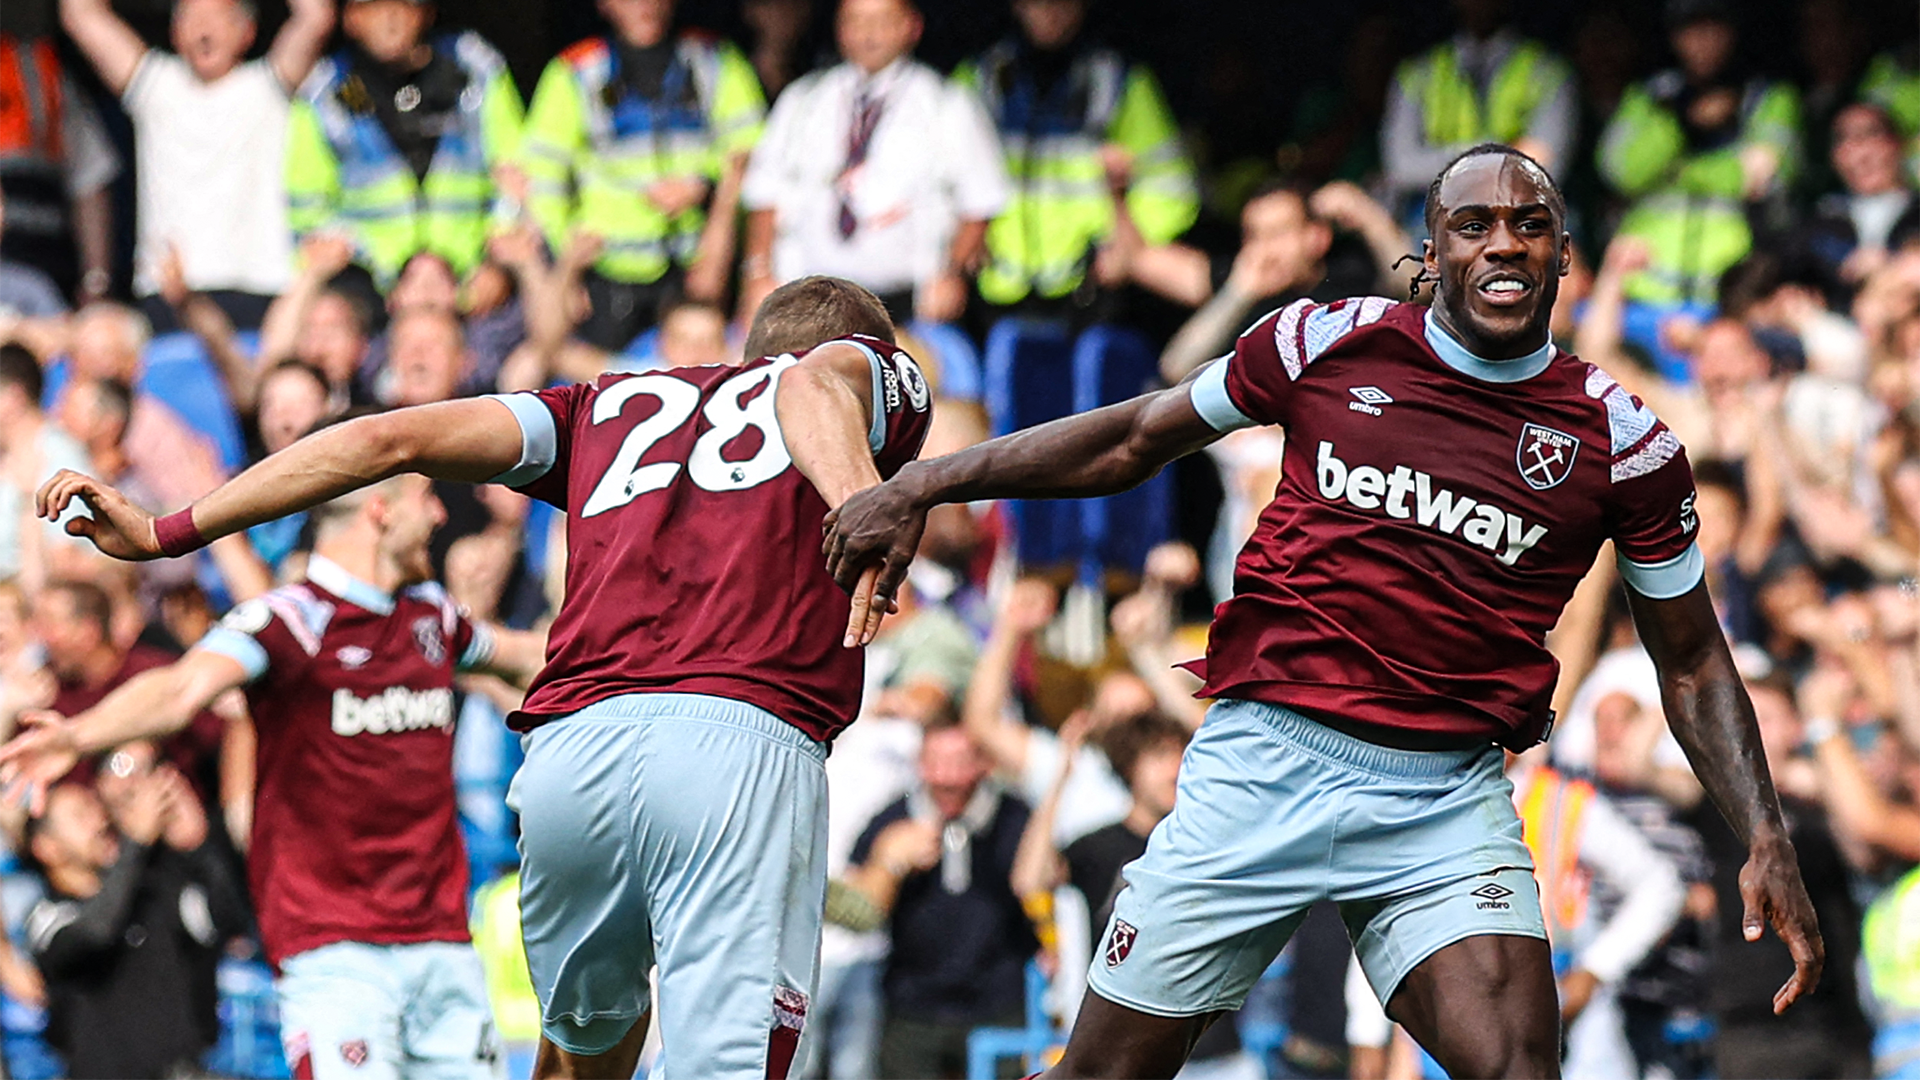 West Ham United vs Fulham Live stream, TV channel, kick-off time and how to watch Goal